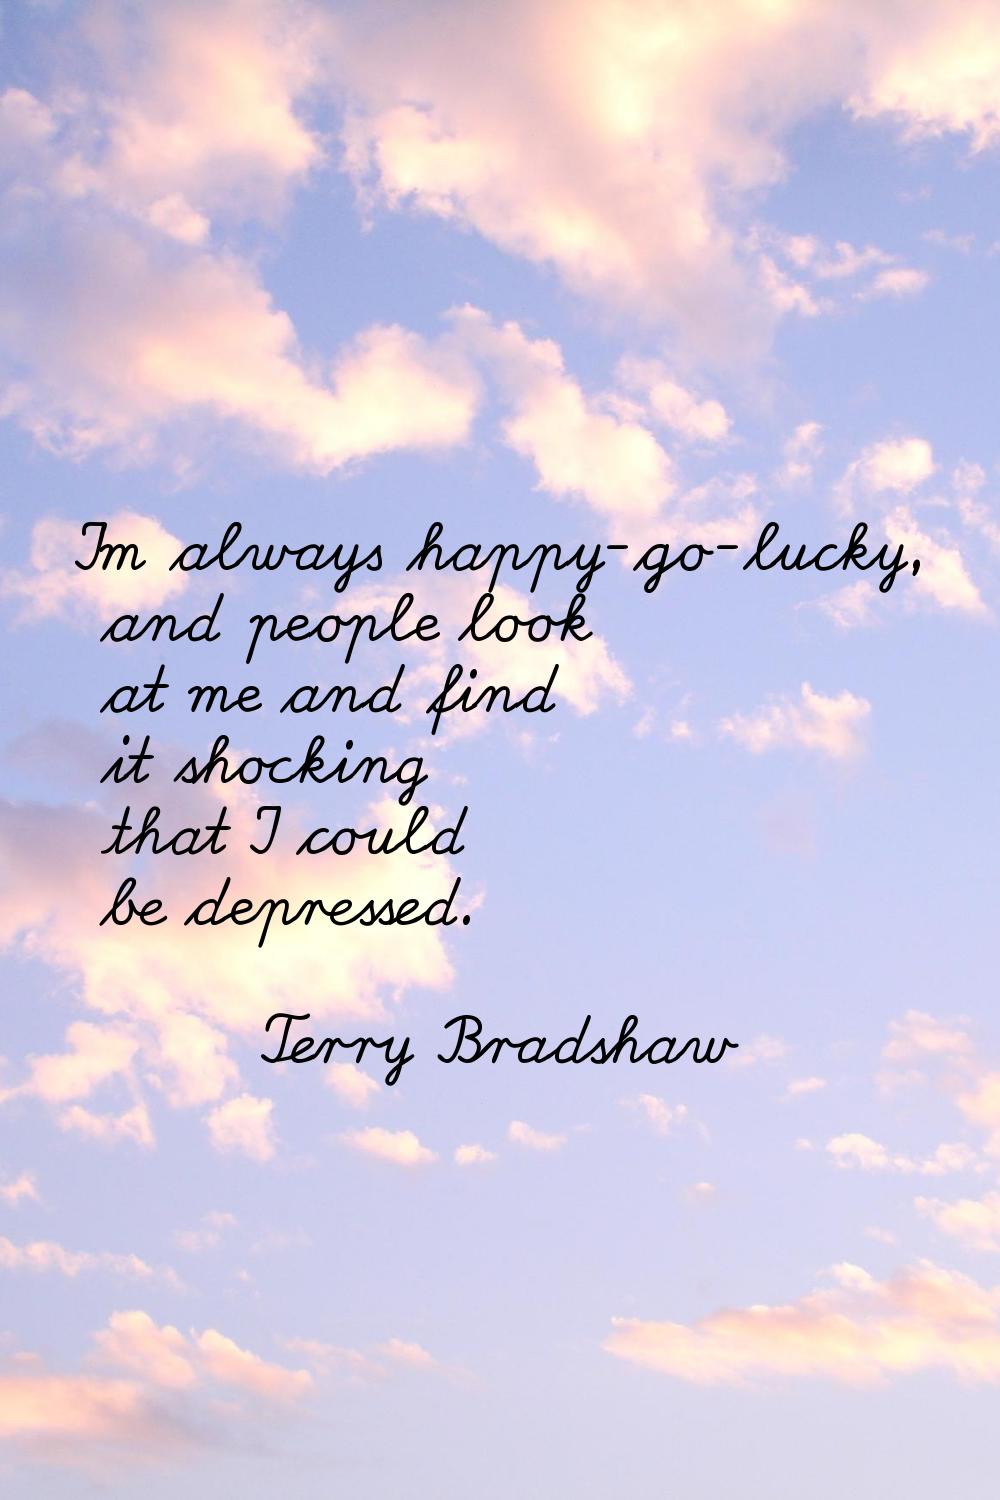 I'm always happy-go-lucky, and people look at me and find it shocking that I could be depressed.